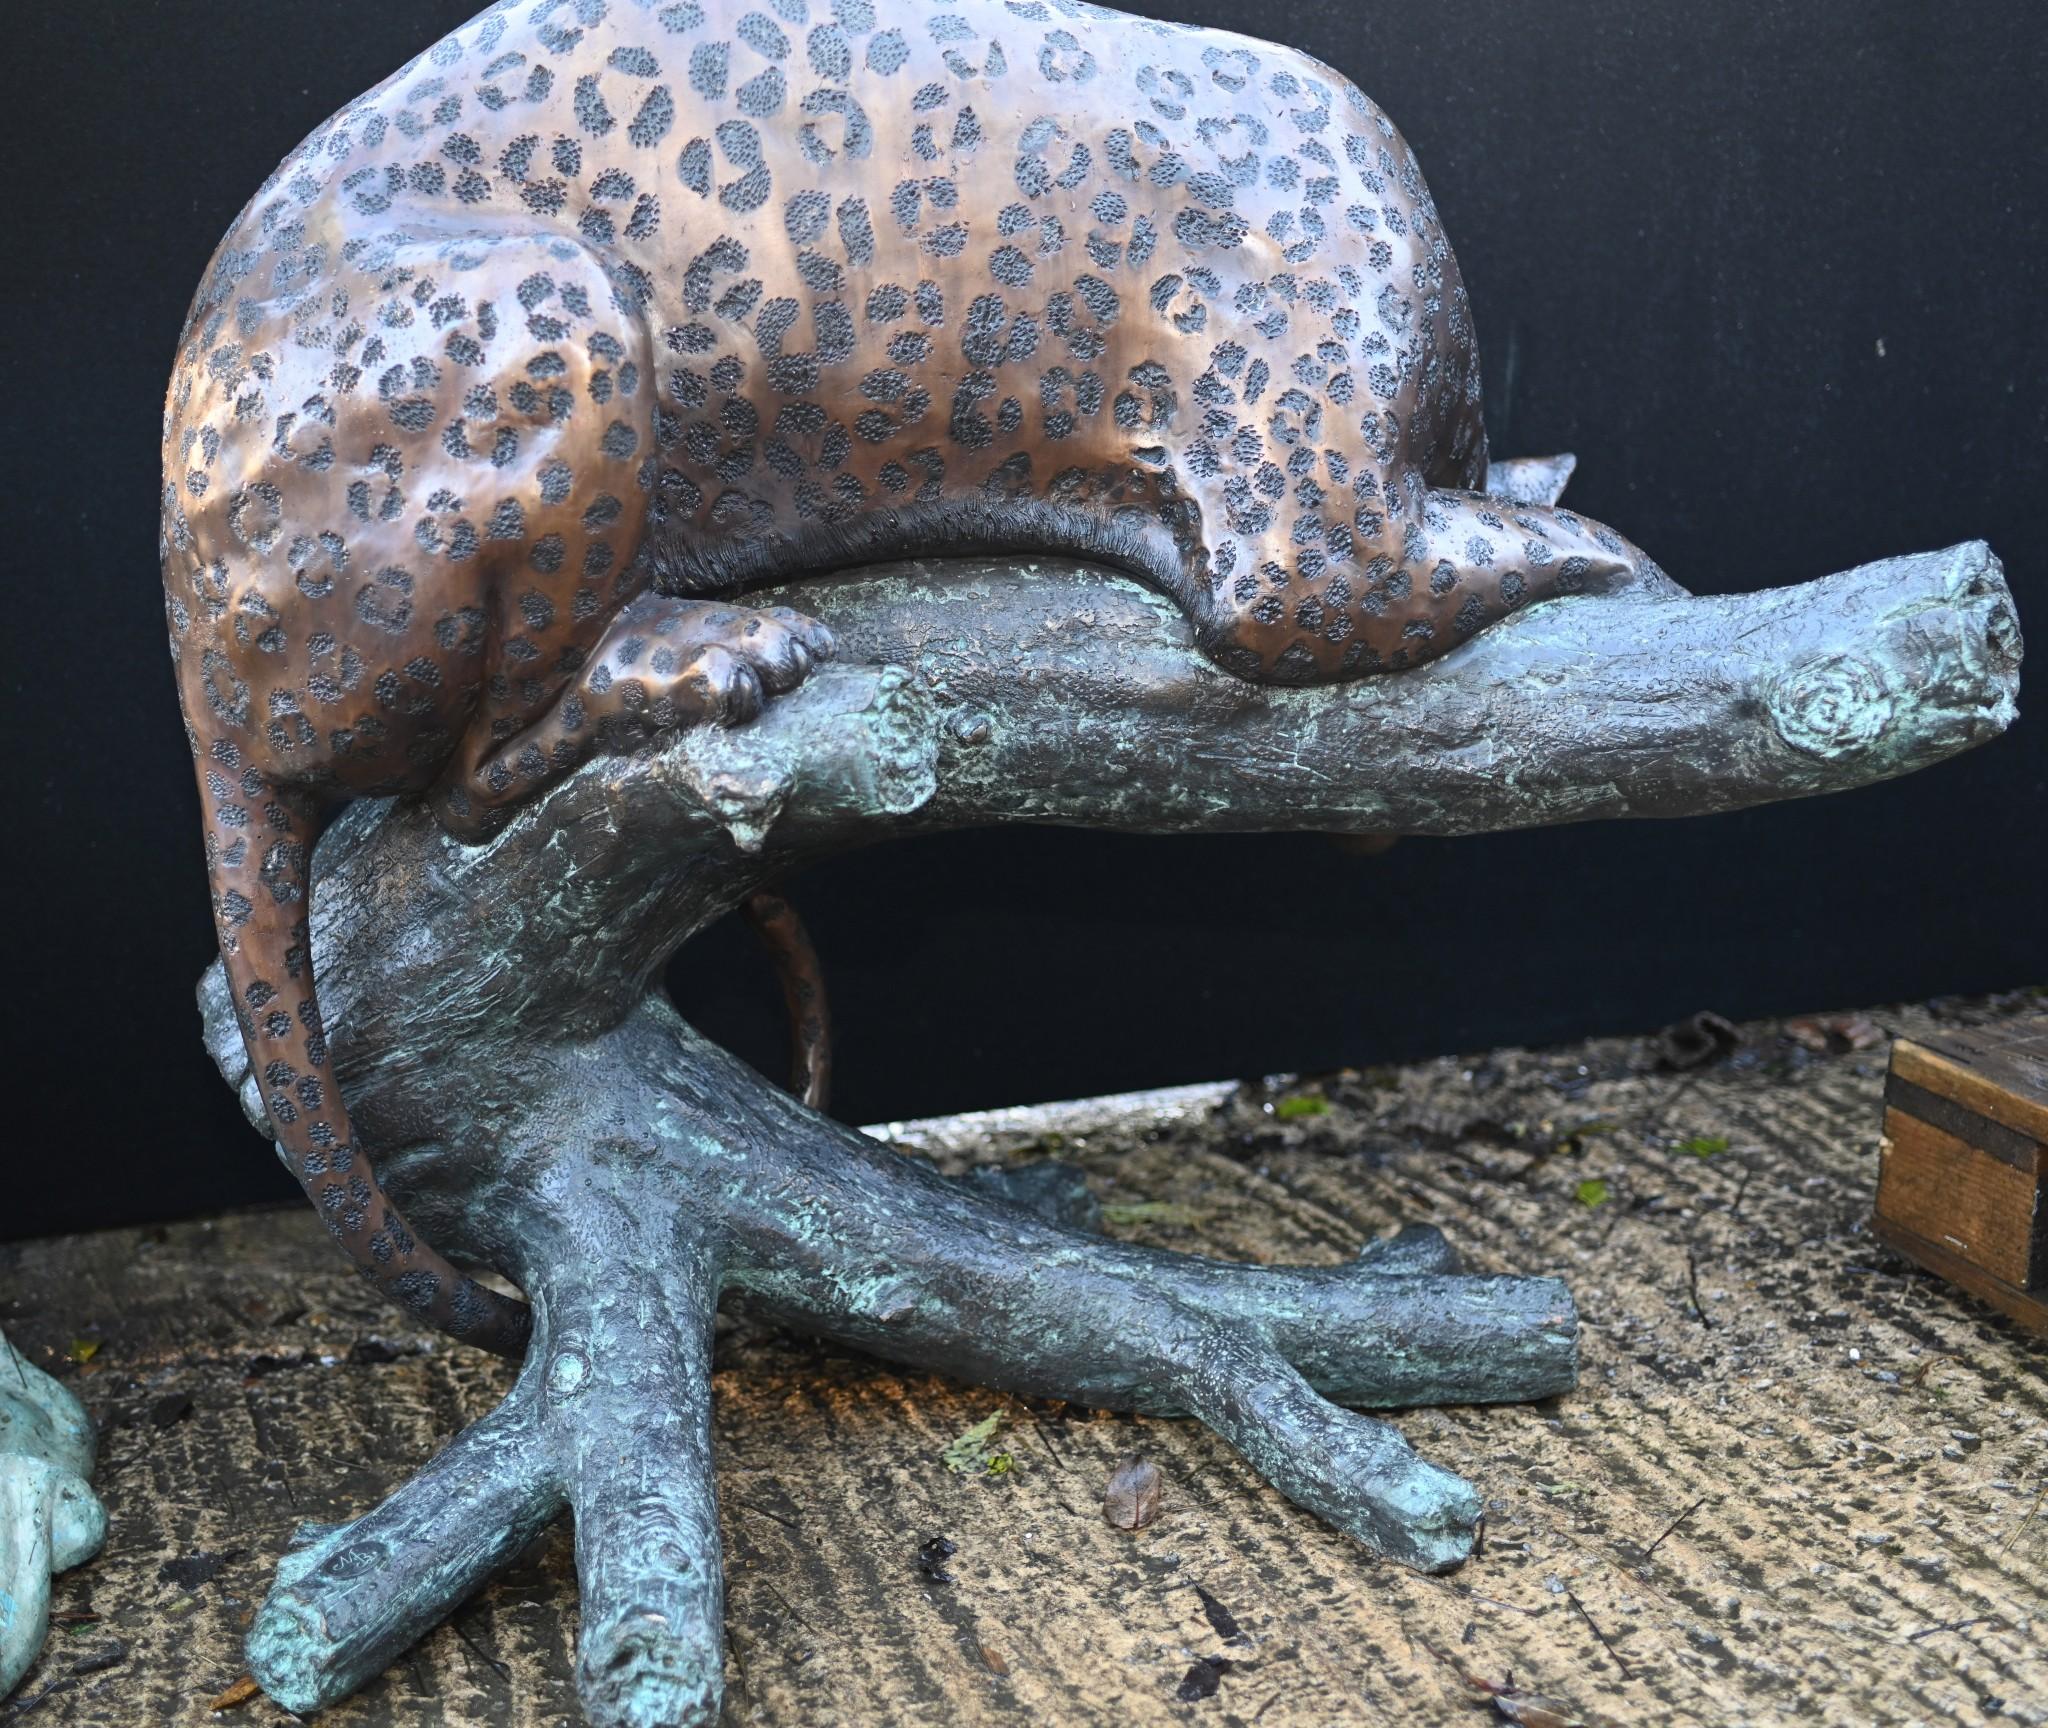 Eye catching large bronze casting of a panther 
Cat depicted on the prowl on the tree trunk
Good size at over three feet tall - 96 cm
Of course being bronze this can live outside with no fear of rusting
Patina to the bronze is superb and the